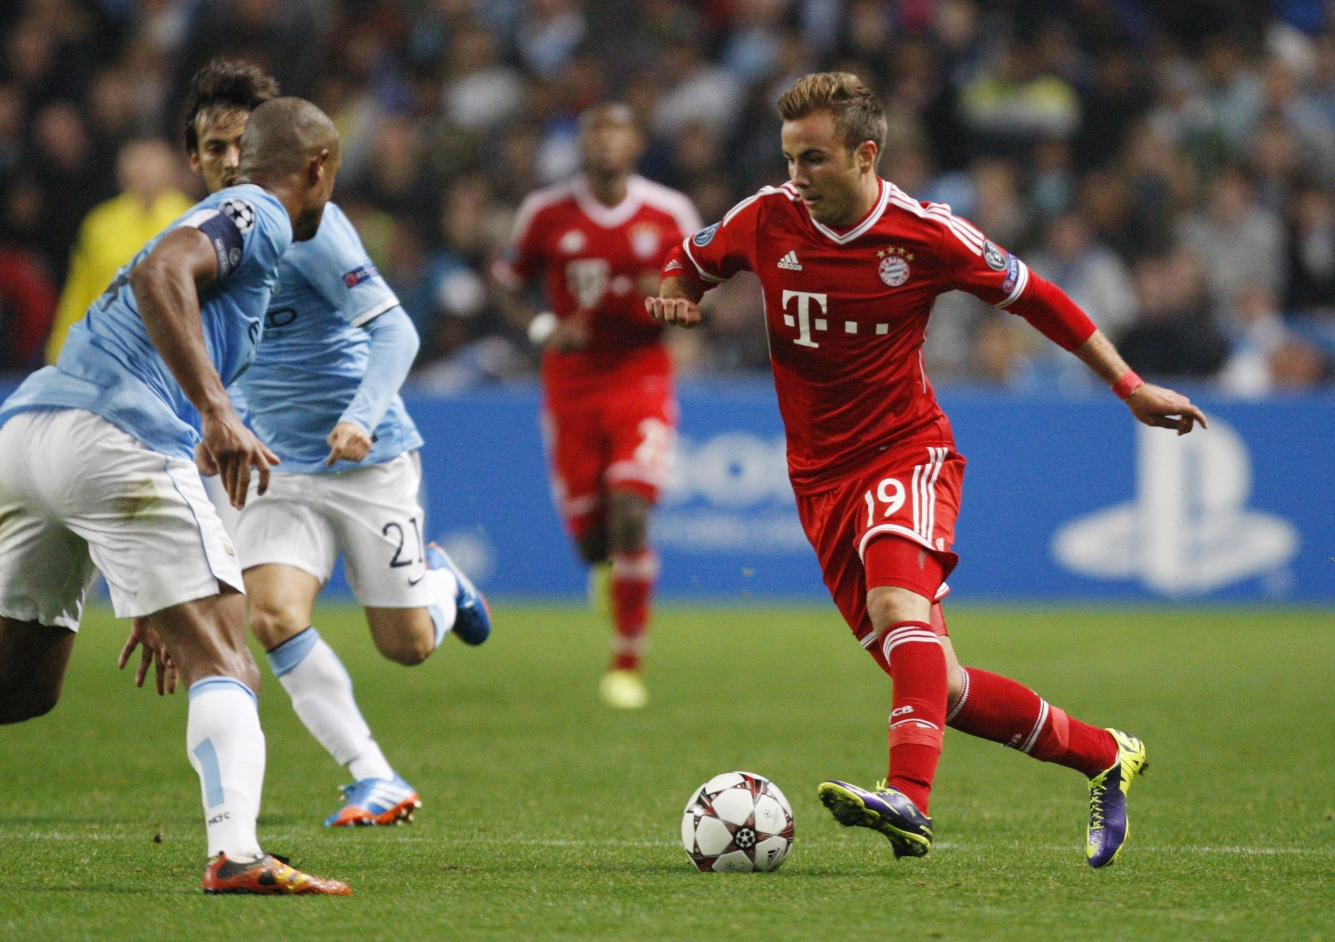 Bayern's Mario Goetze, right, and Manchester City's Vincent Kompany challenge for the ball. Photo: AP